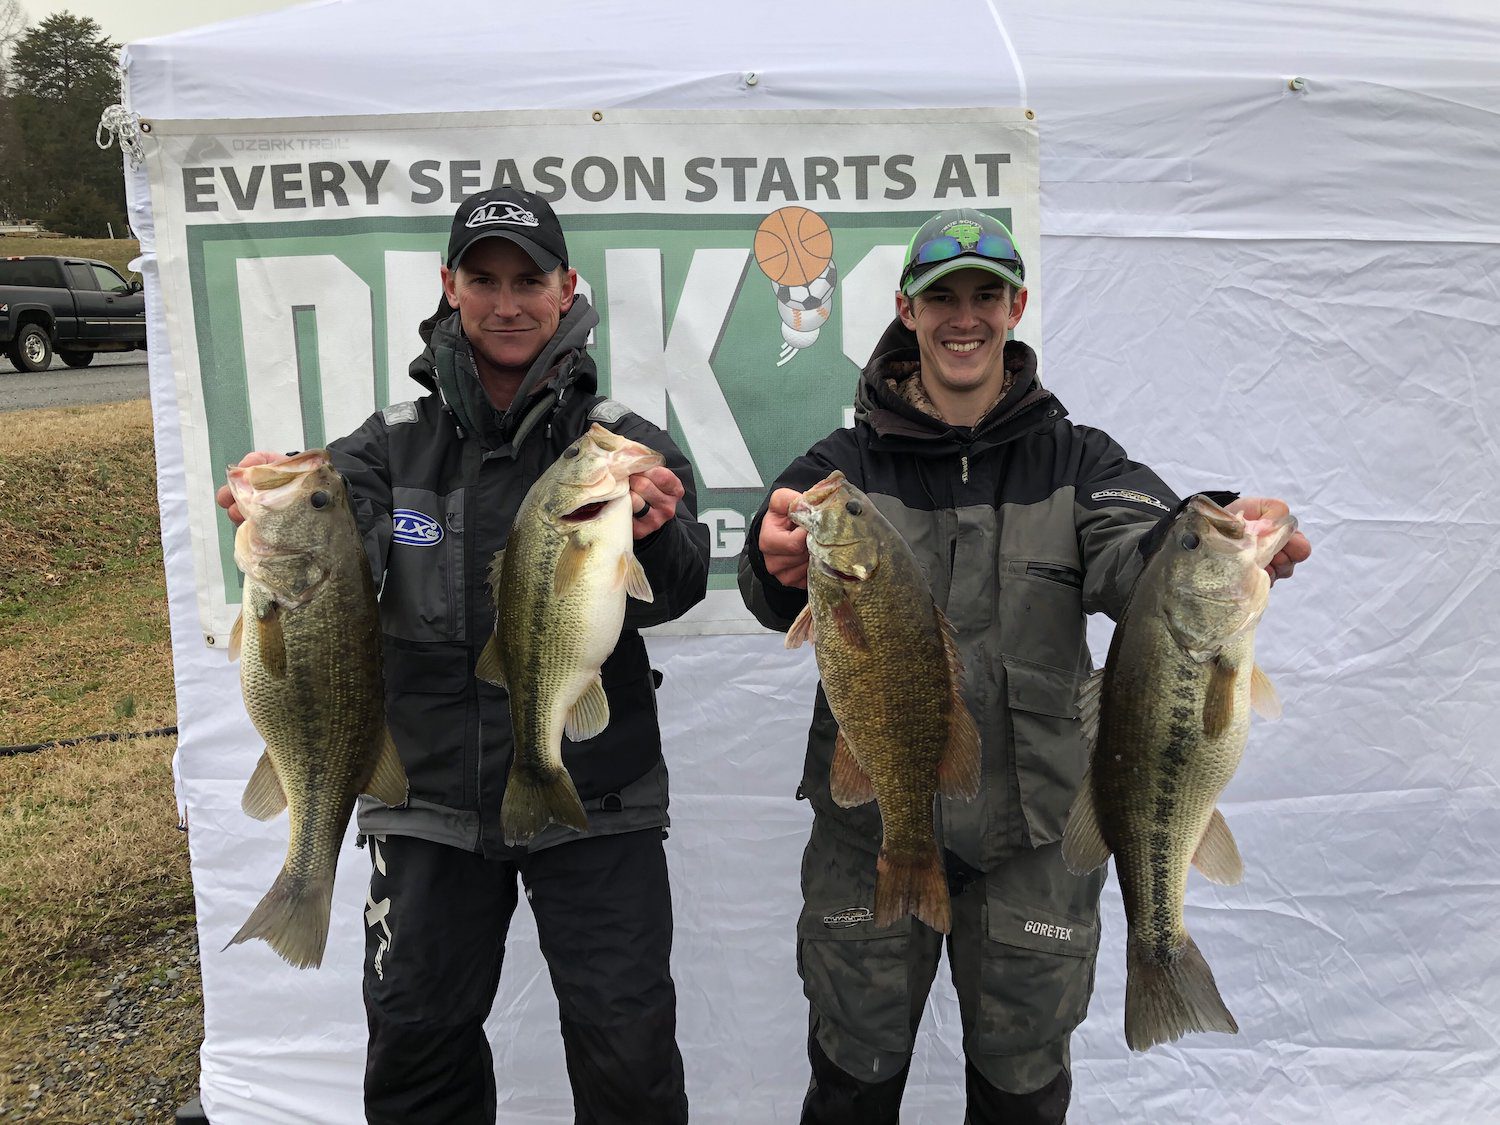 Elliot & Chad Pilson Win Bass Cast T.T. Stop #1 March 9, 2019 with 21.54 lbs